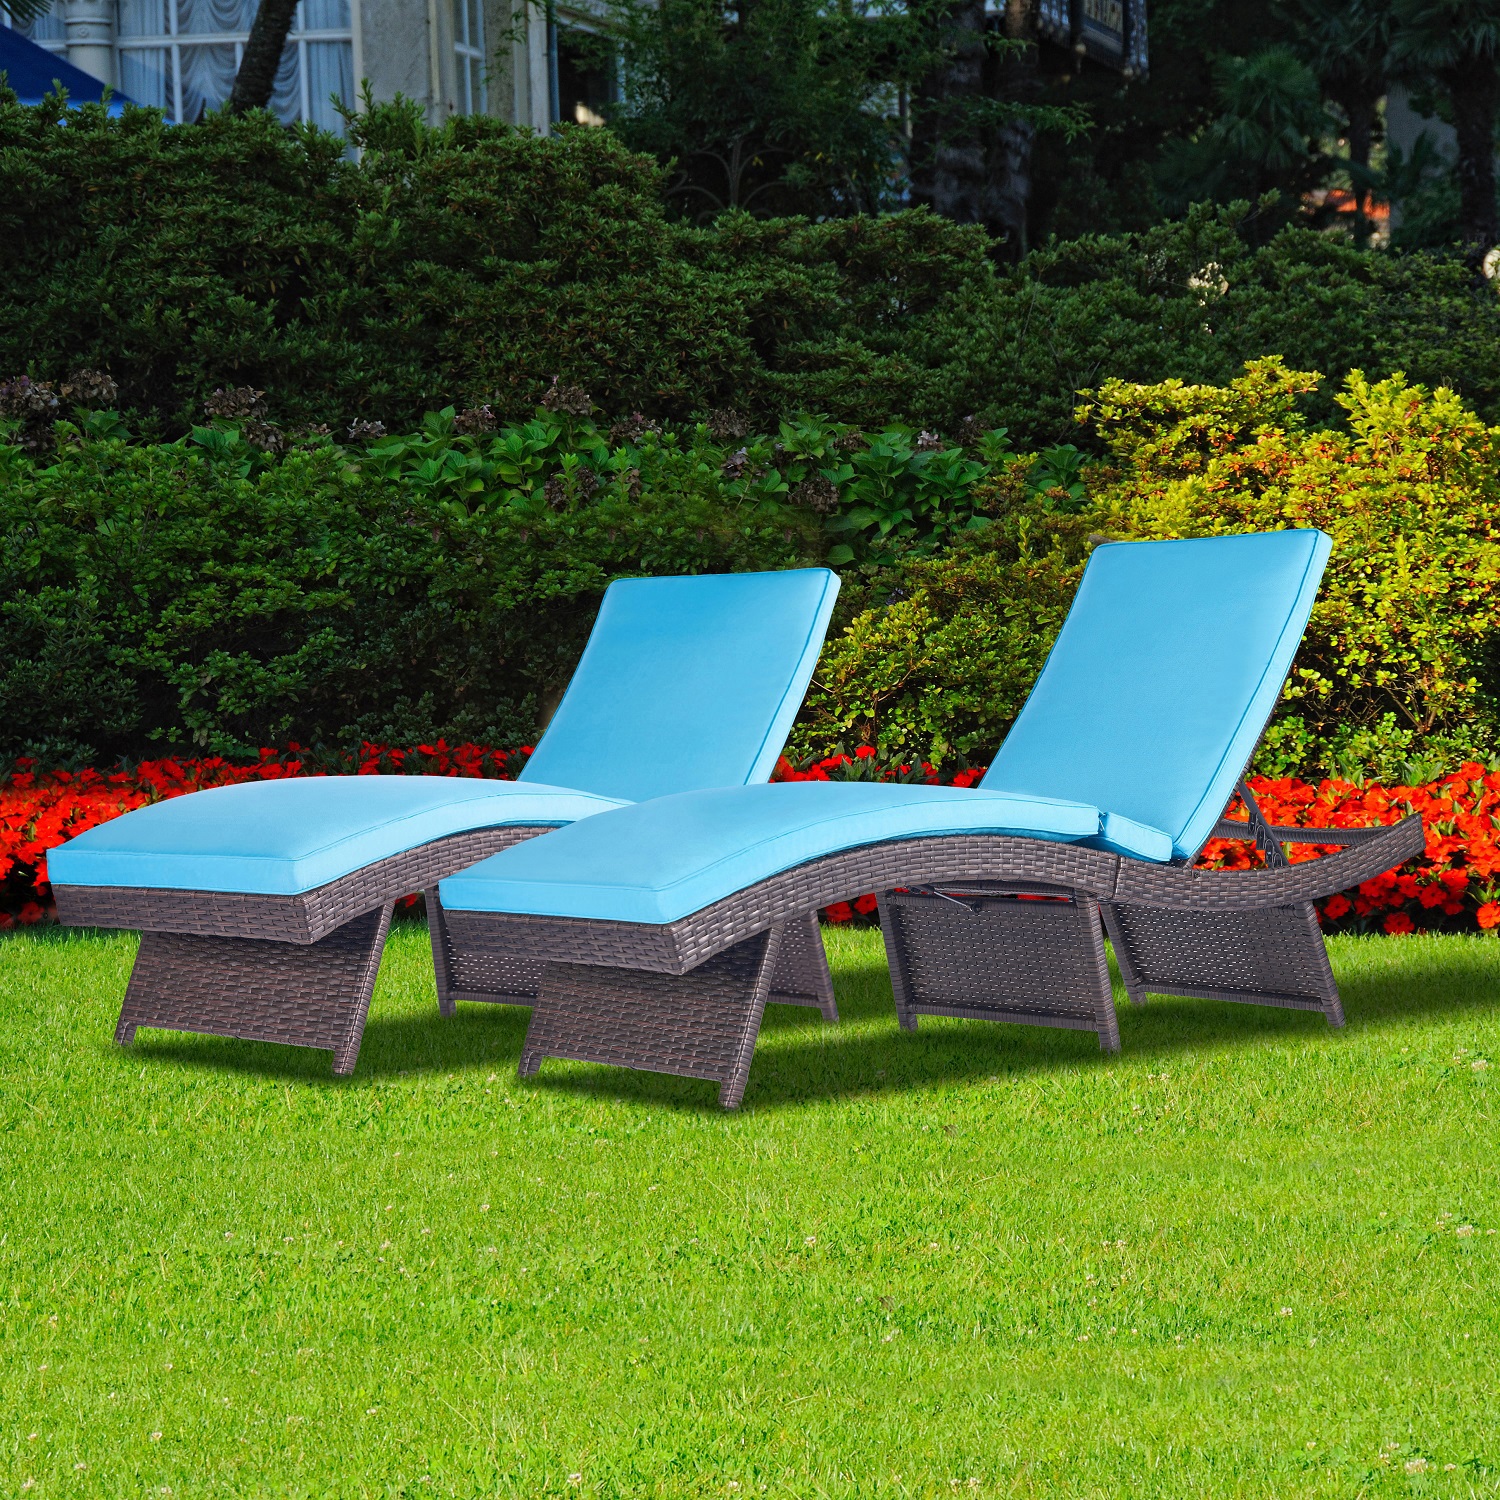 Chaise Lounge Chairs for Outside Foldable Outdoor Patio Wicker Lounge Chair Assembled Rattan Sunbathing Reclining Sunbed Layout Chair with Cushion Blue S Type Adjustable Backrest, No Assembly Required - image 3 of 7